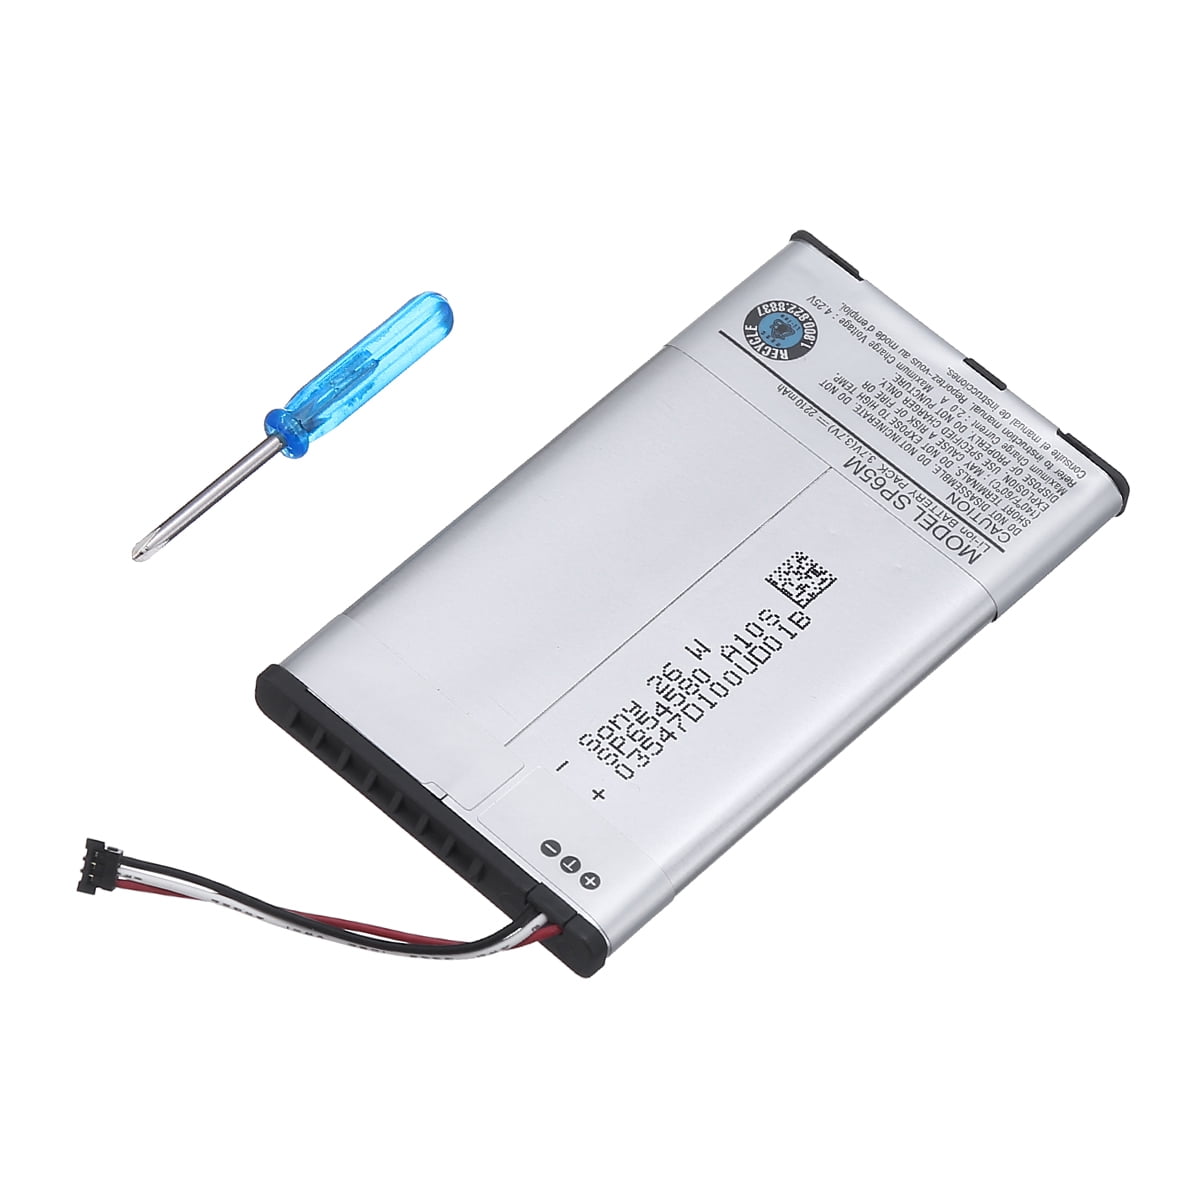 PS Vita 1000 Battery Mod Upgrade Replacement 706090 